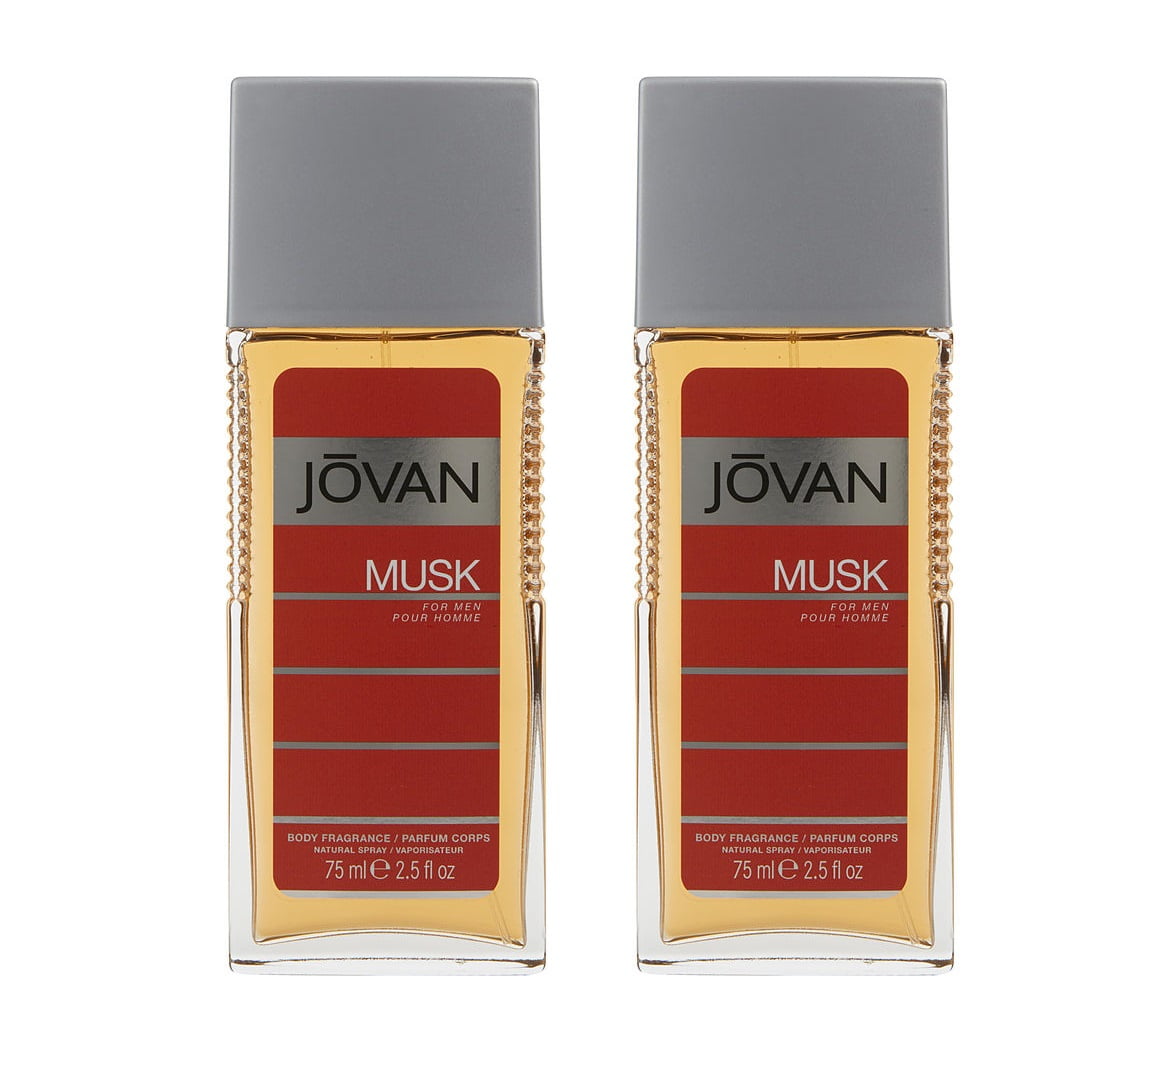 Jovan Body Tonic Soothing Tonic for Men Light Cologne Spray 6.7 oz Low-Fill  RARE